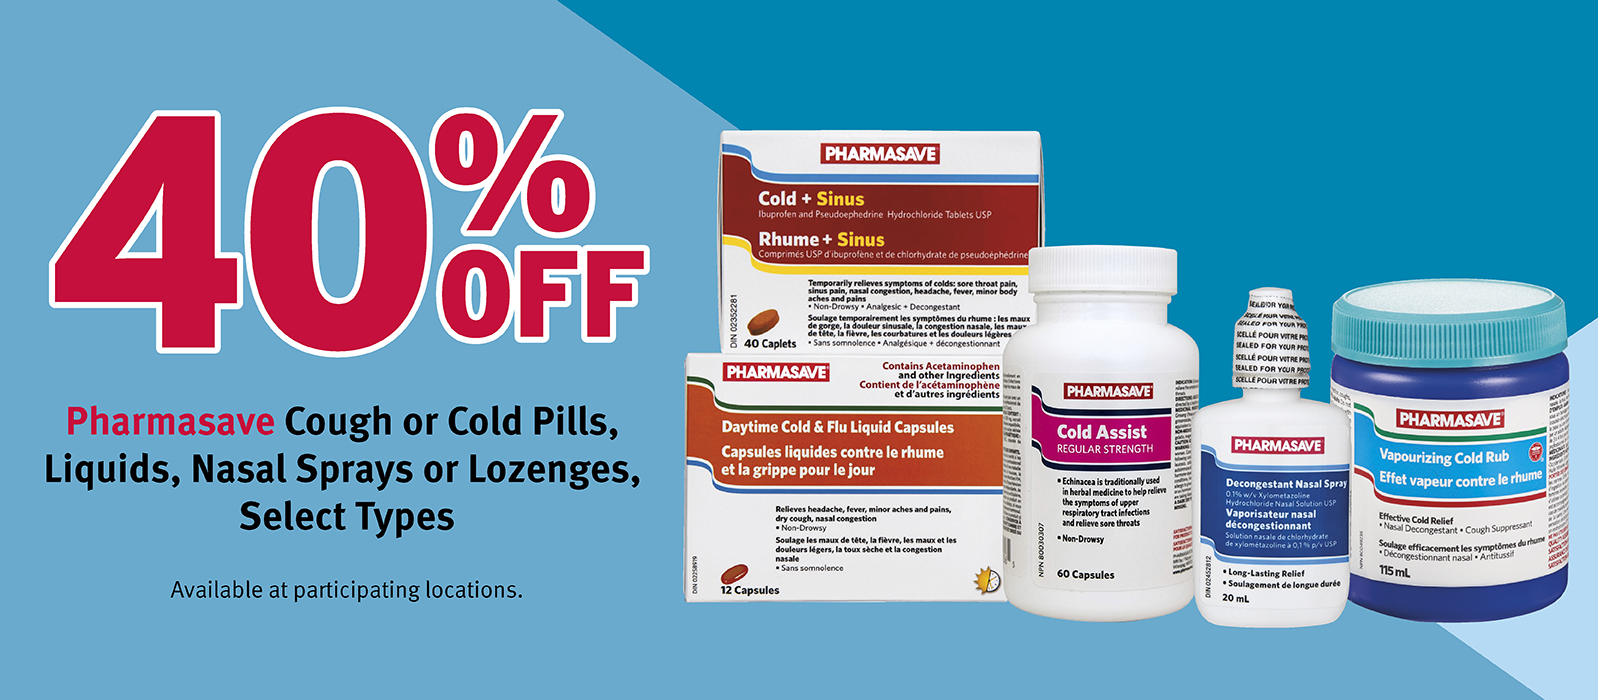 40% off on Pharmasave Cough or cold pills, liquids, nasal sprays or lozenges